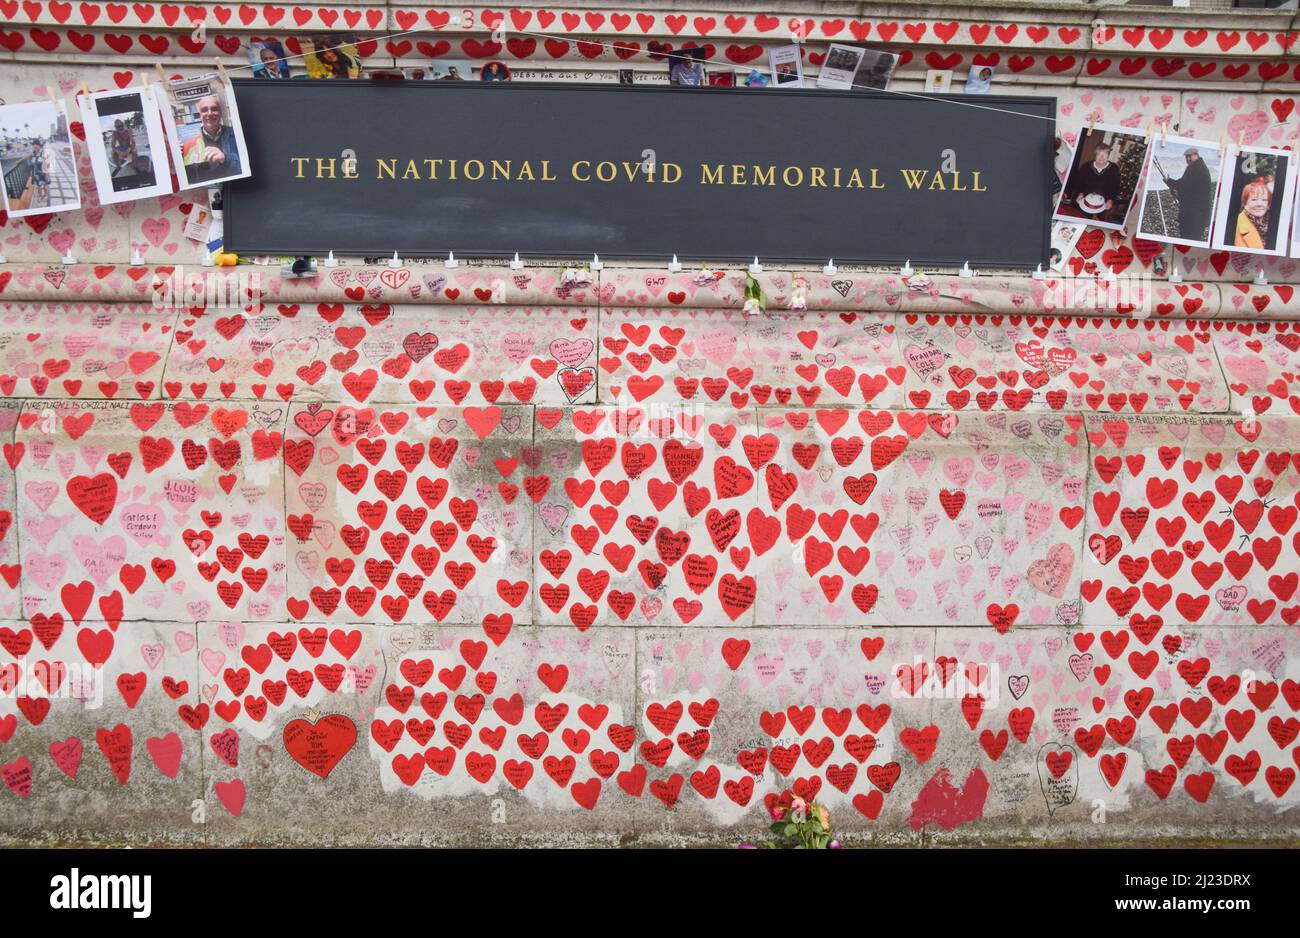 London, UK. 29th March 2022. Photos of people who lost their lives to coronavirus have been hung on the National Covid Memorial Wall to mark one year since the memorial was created. Over 150,000 red hearts have been painted on the wall to date, one for each life lost to Covid-19. Credit: Vuk Valcic/Alamy Live News Stock Photo